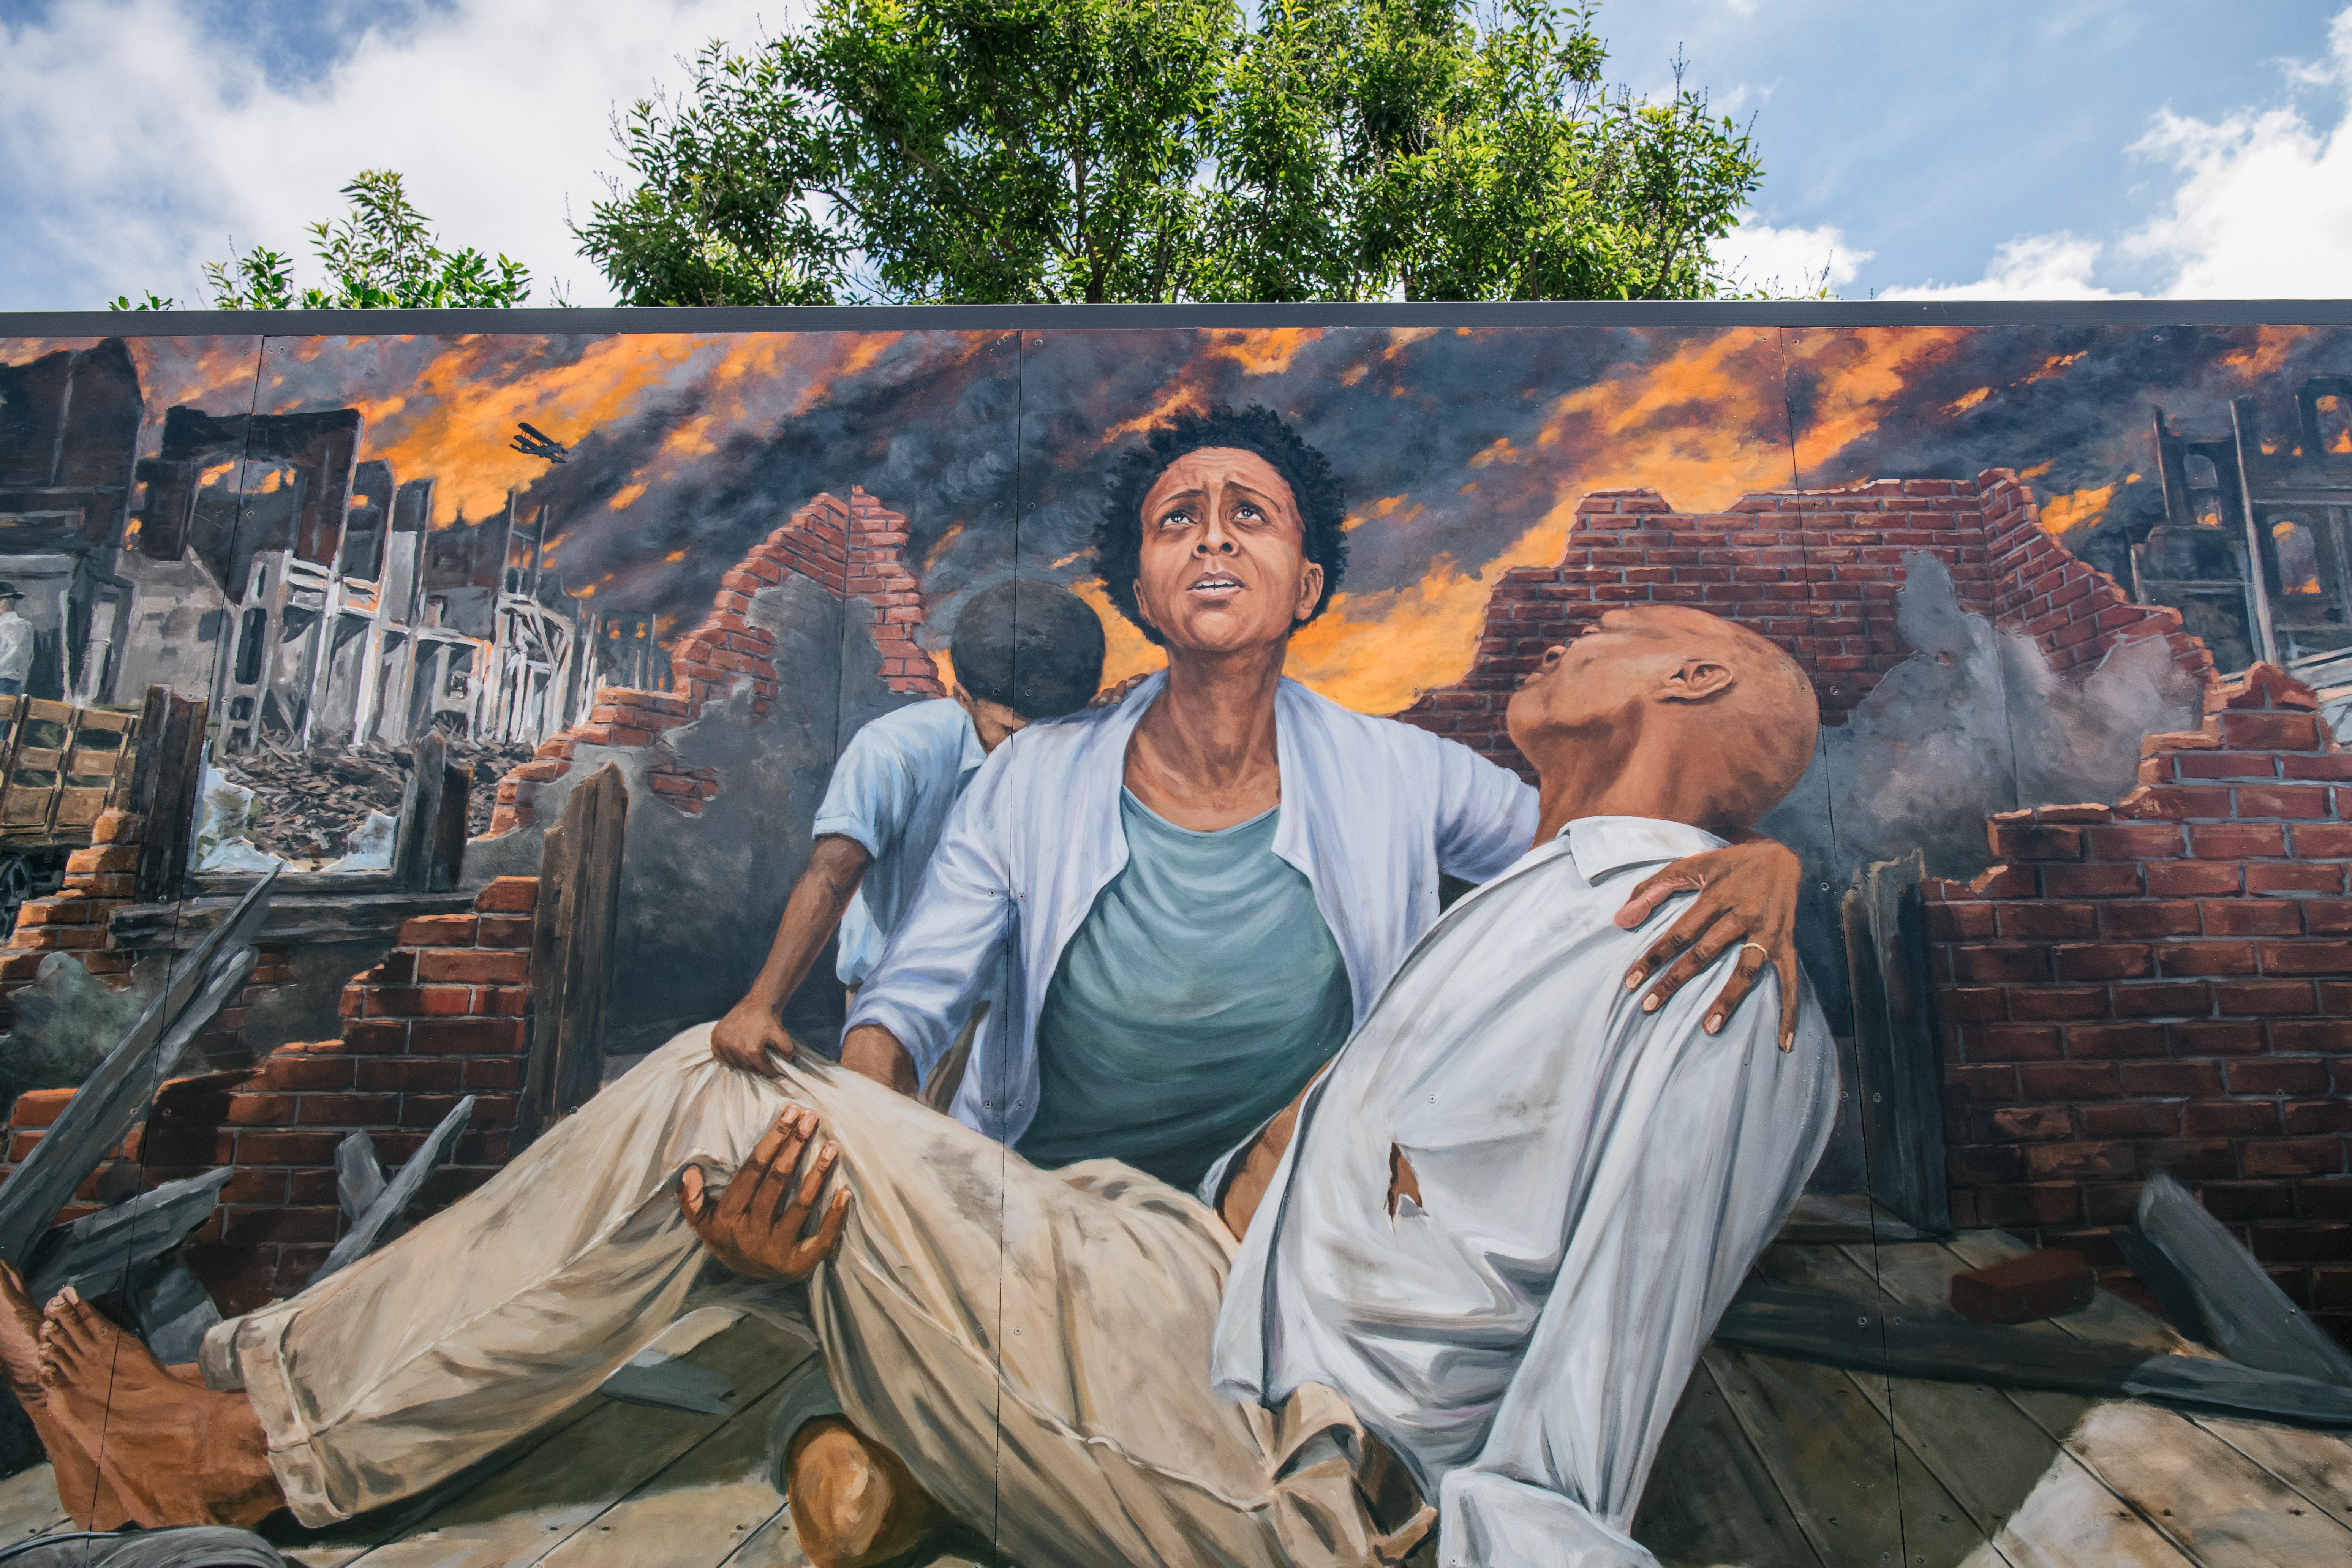 TULSA, OKLAHOMA - MAY 28 A mural depicting a woman and child holding a man during the Tulsa massacre.